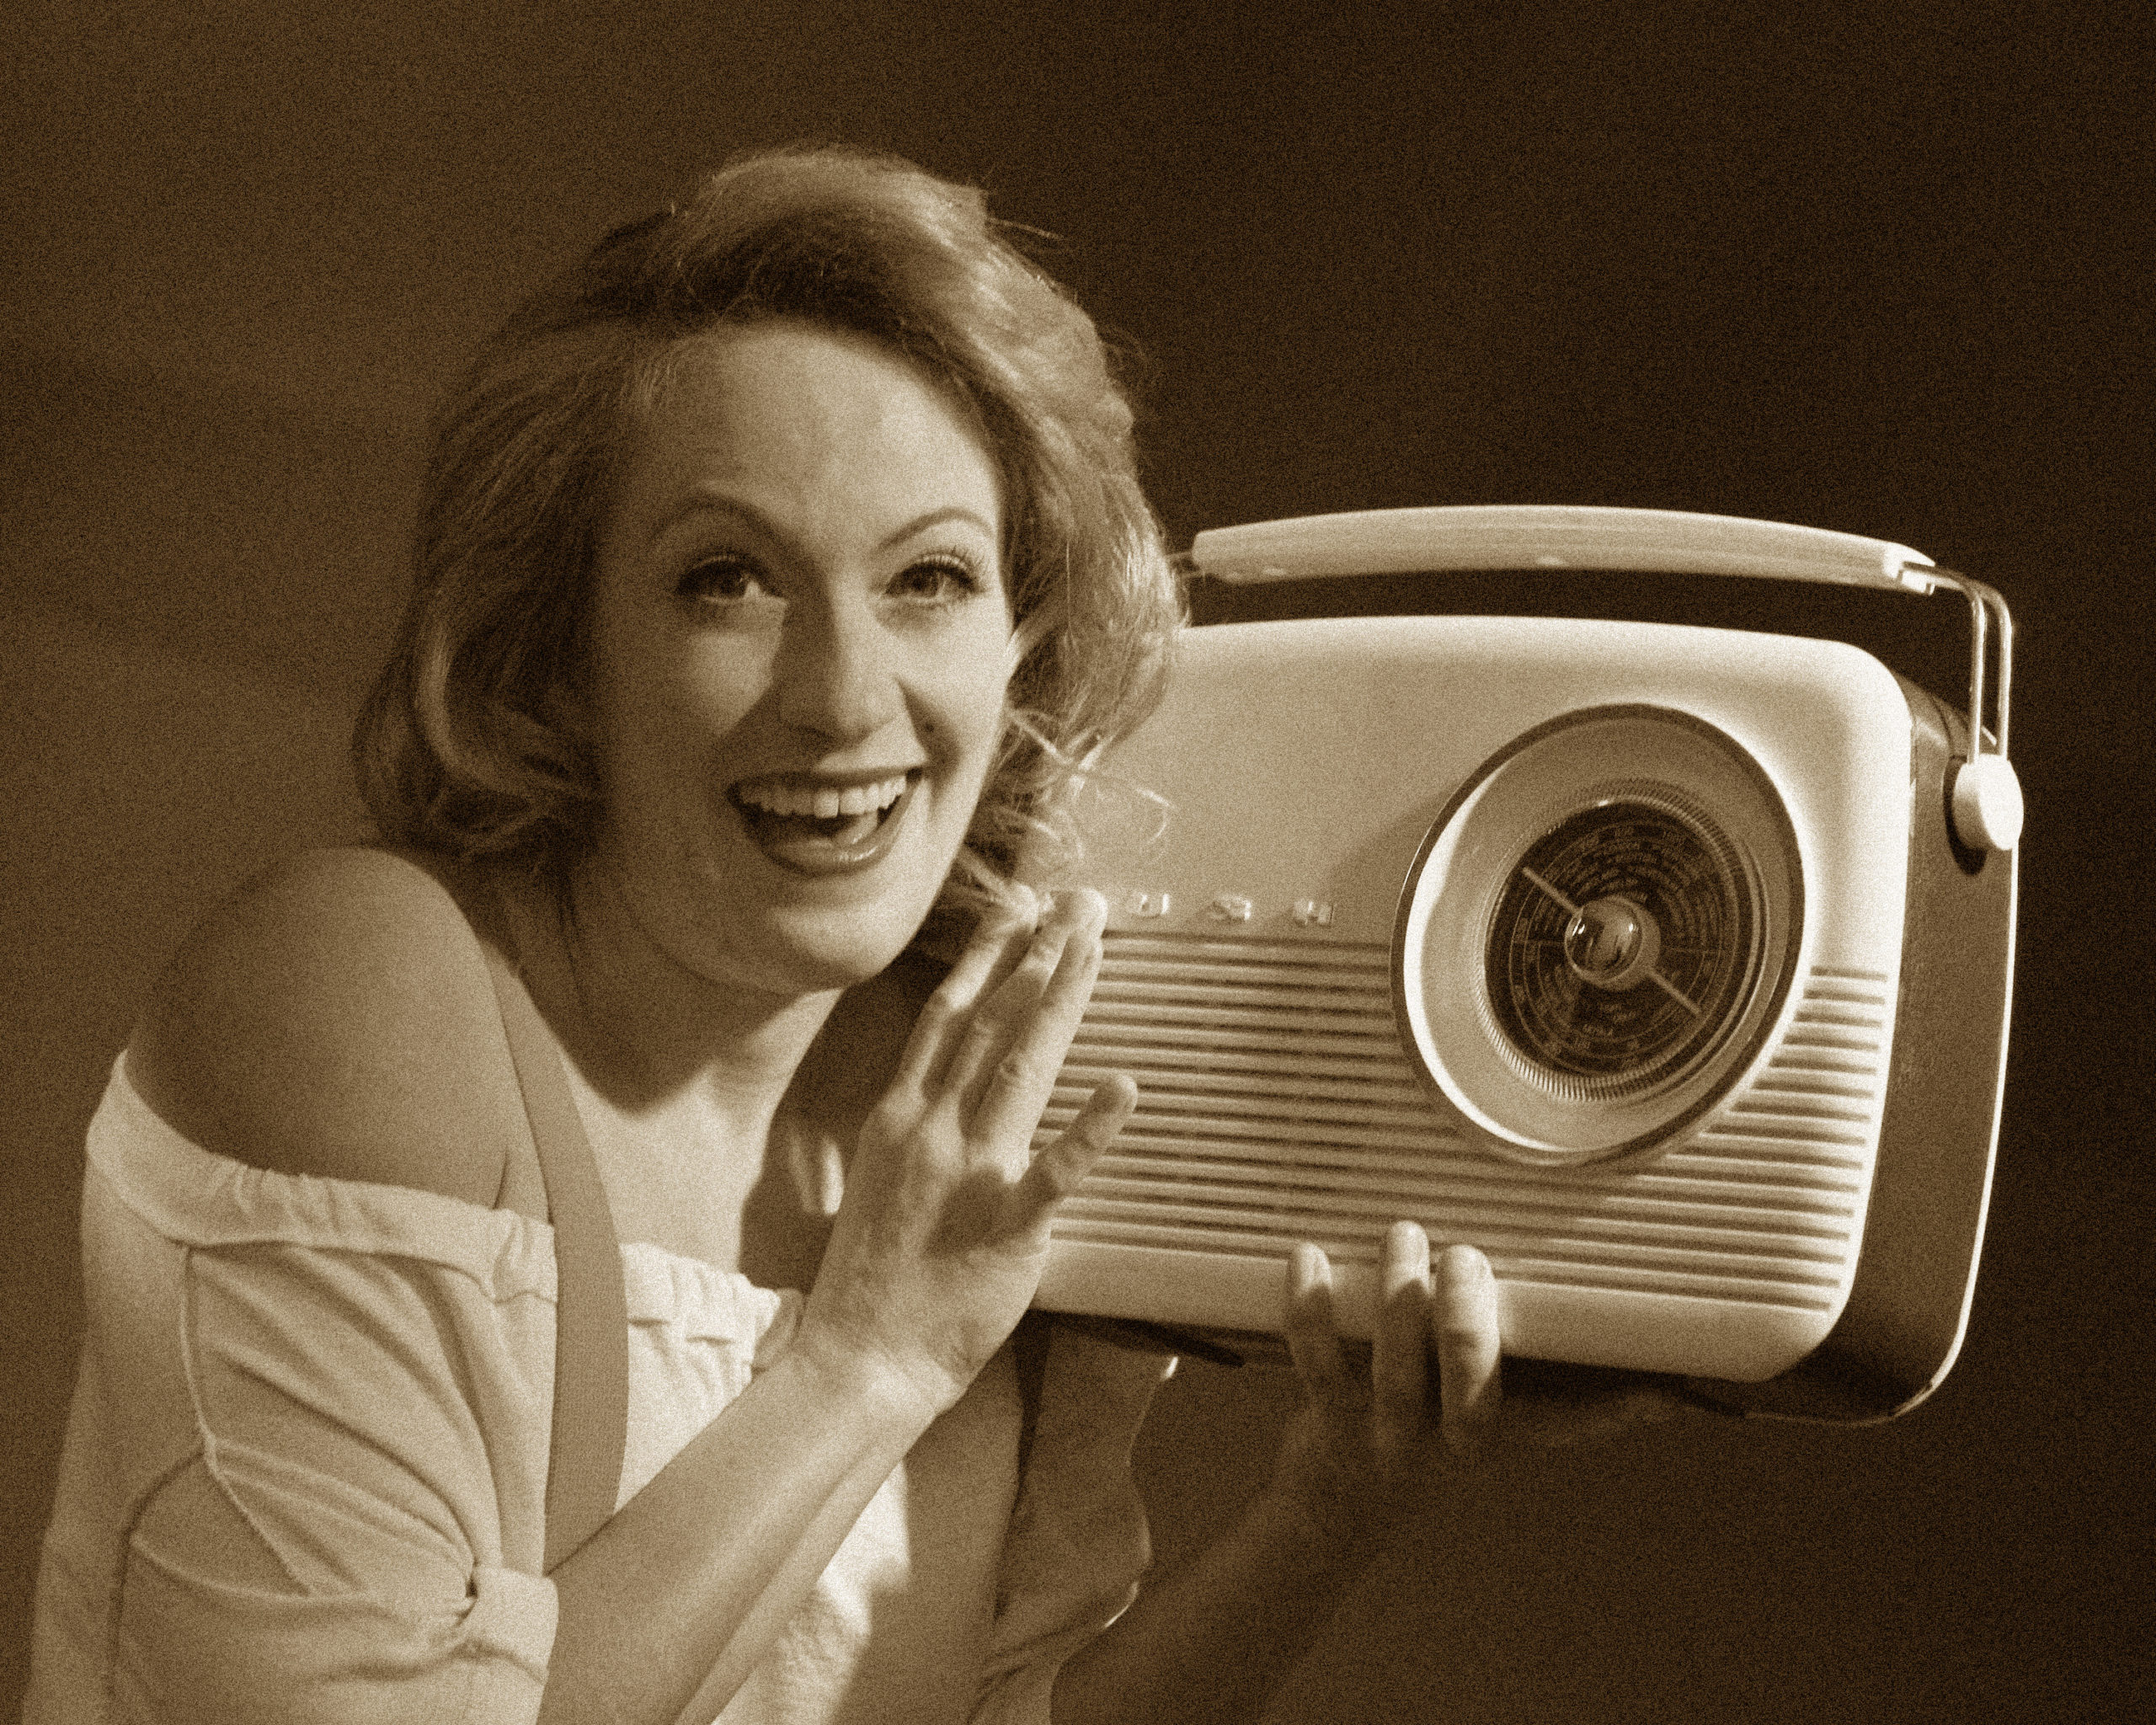 Is Radio Loyalty Back In Style?